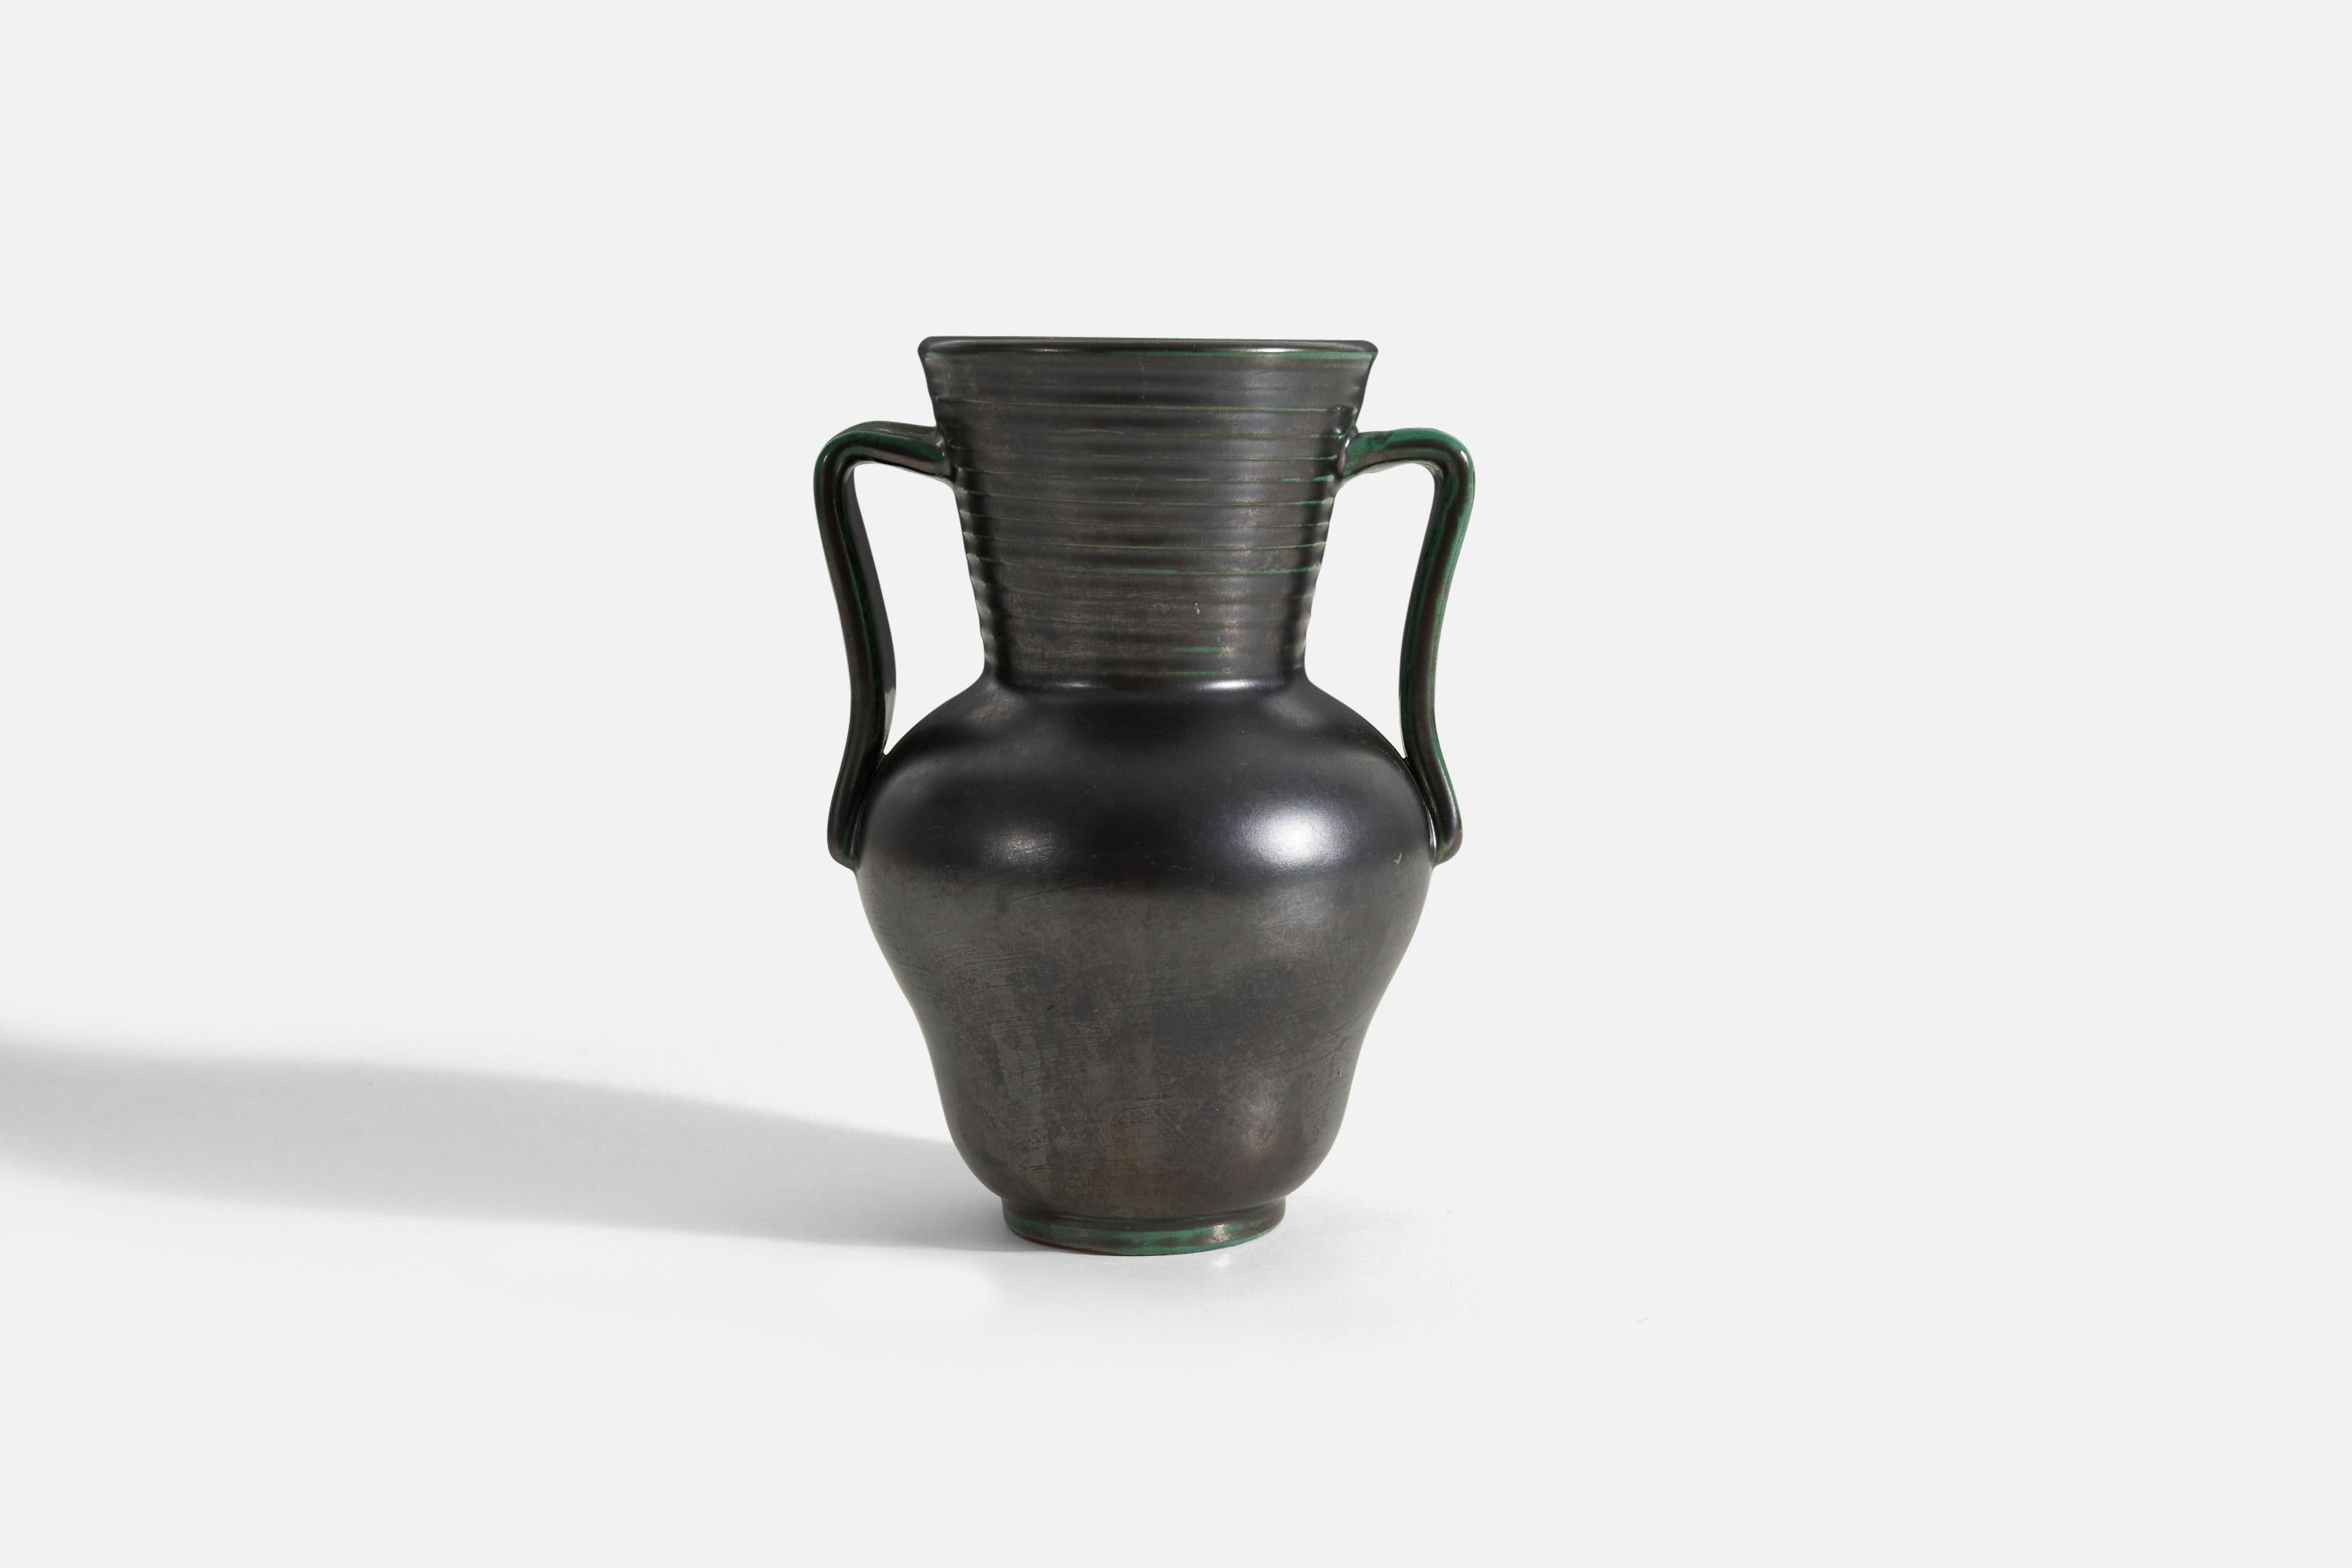 A black-glazed earthenware vase with green undertones and large handles produced by Upsala-Ekeby, Sweden, 1940s.